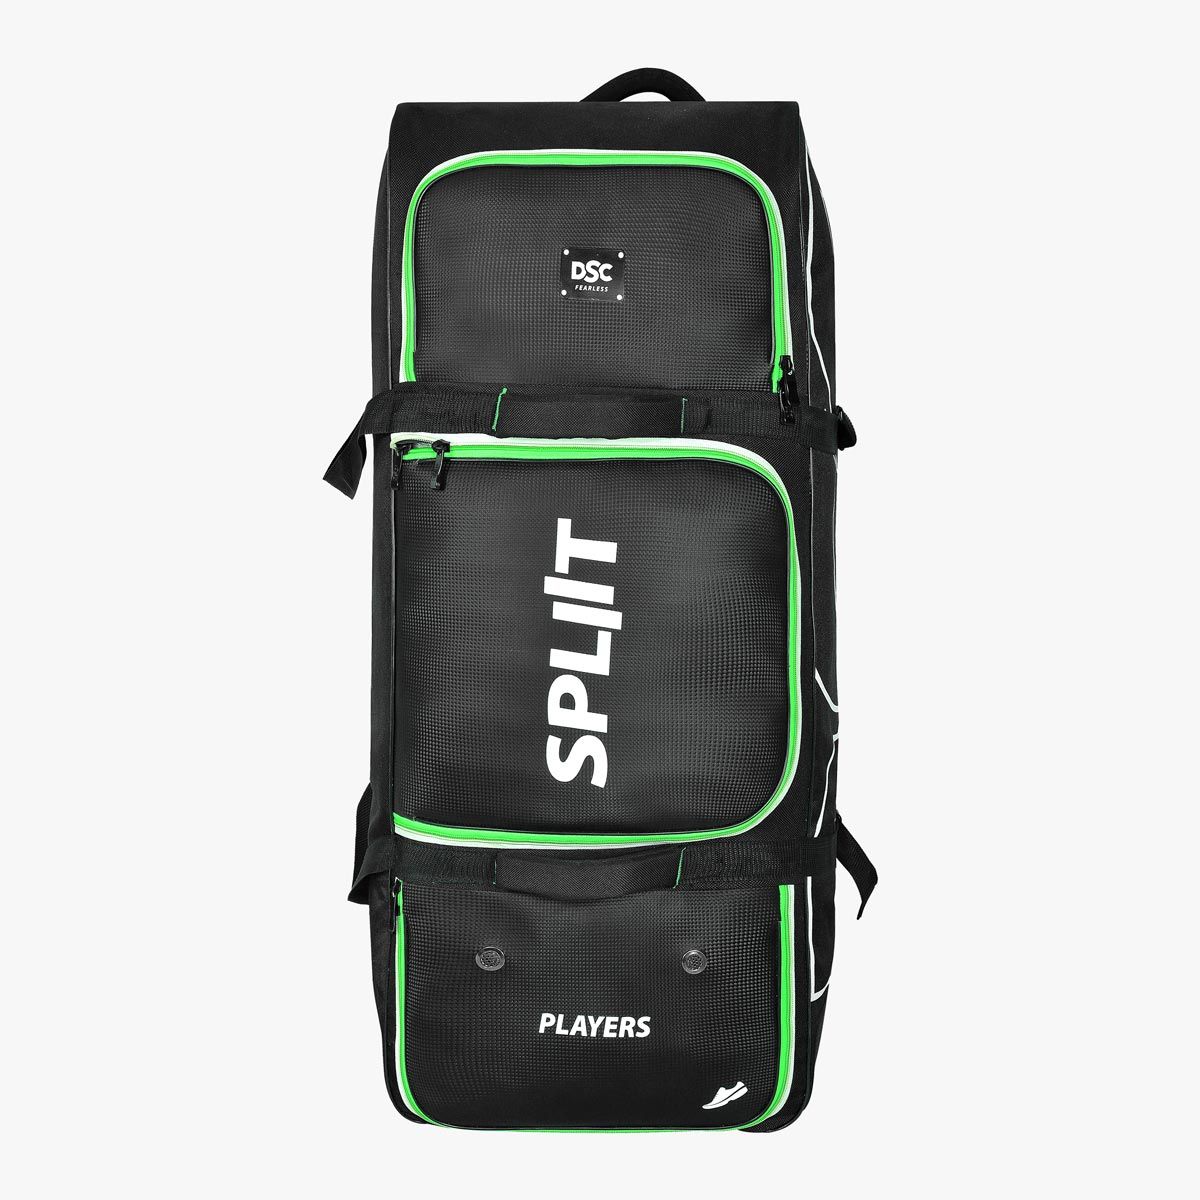 Buy SS Players Cricket Kit Bag @best prices | SS Cricket